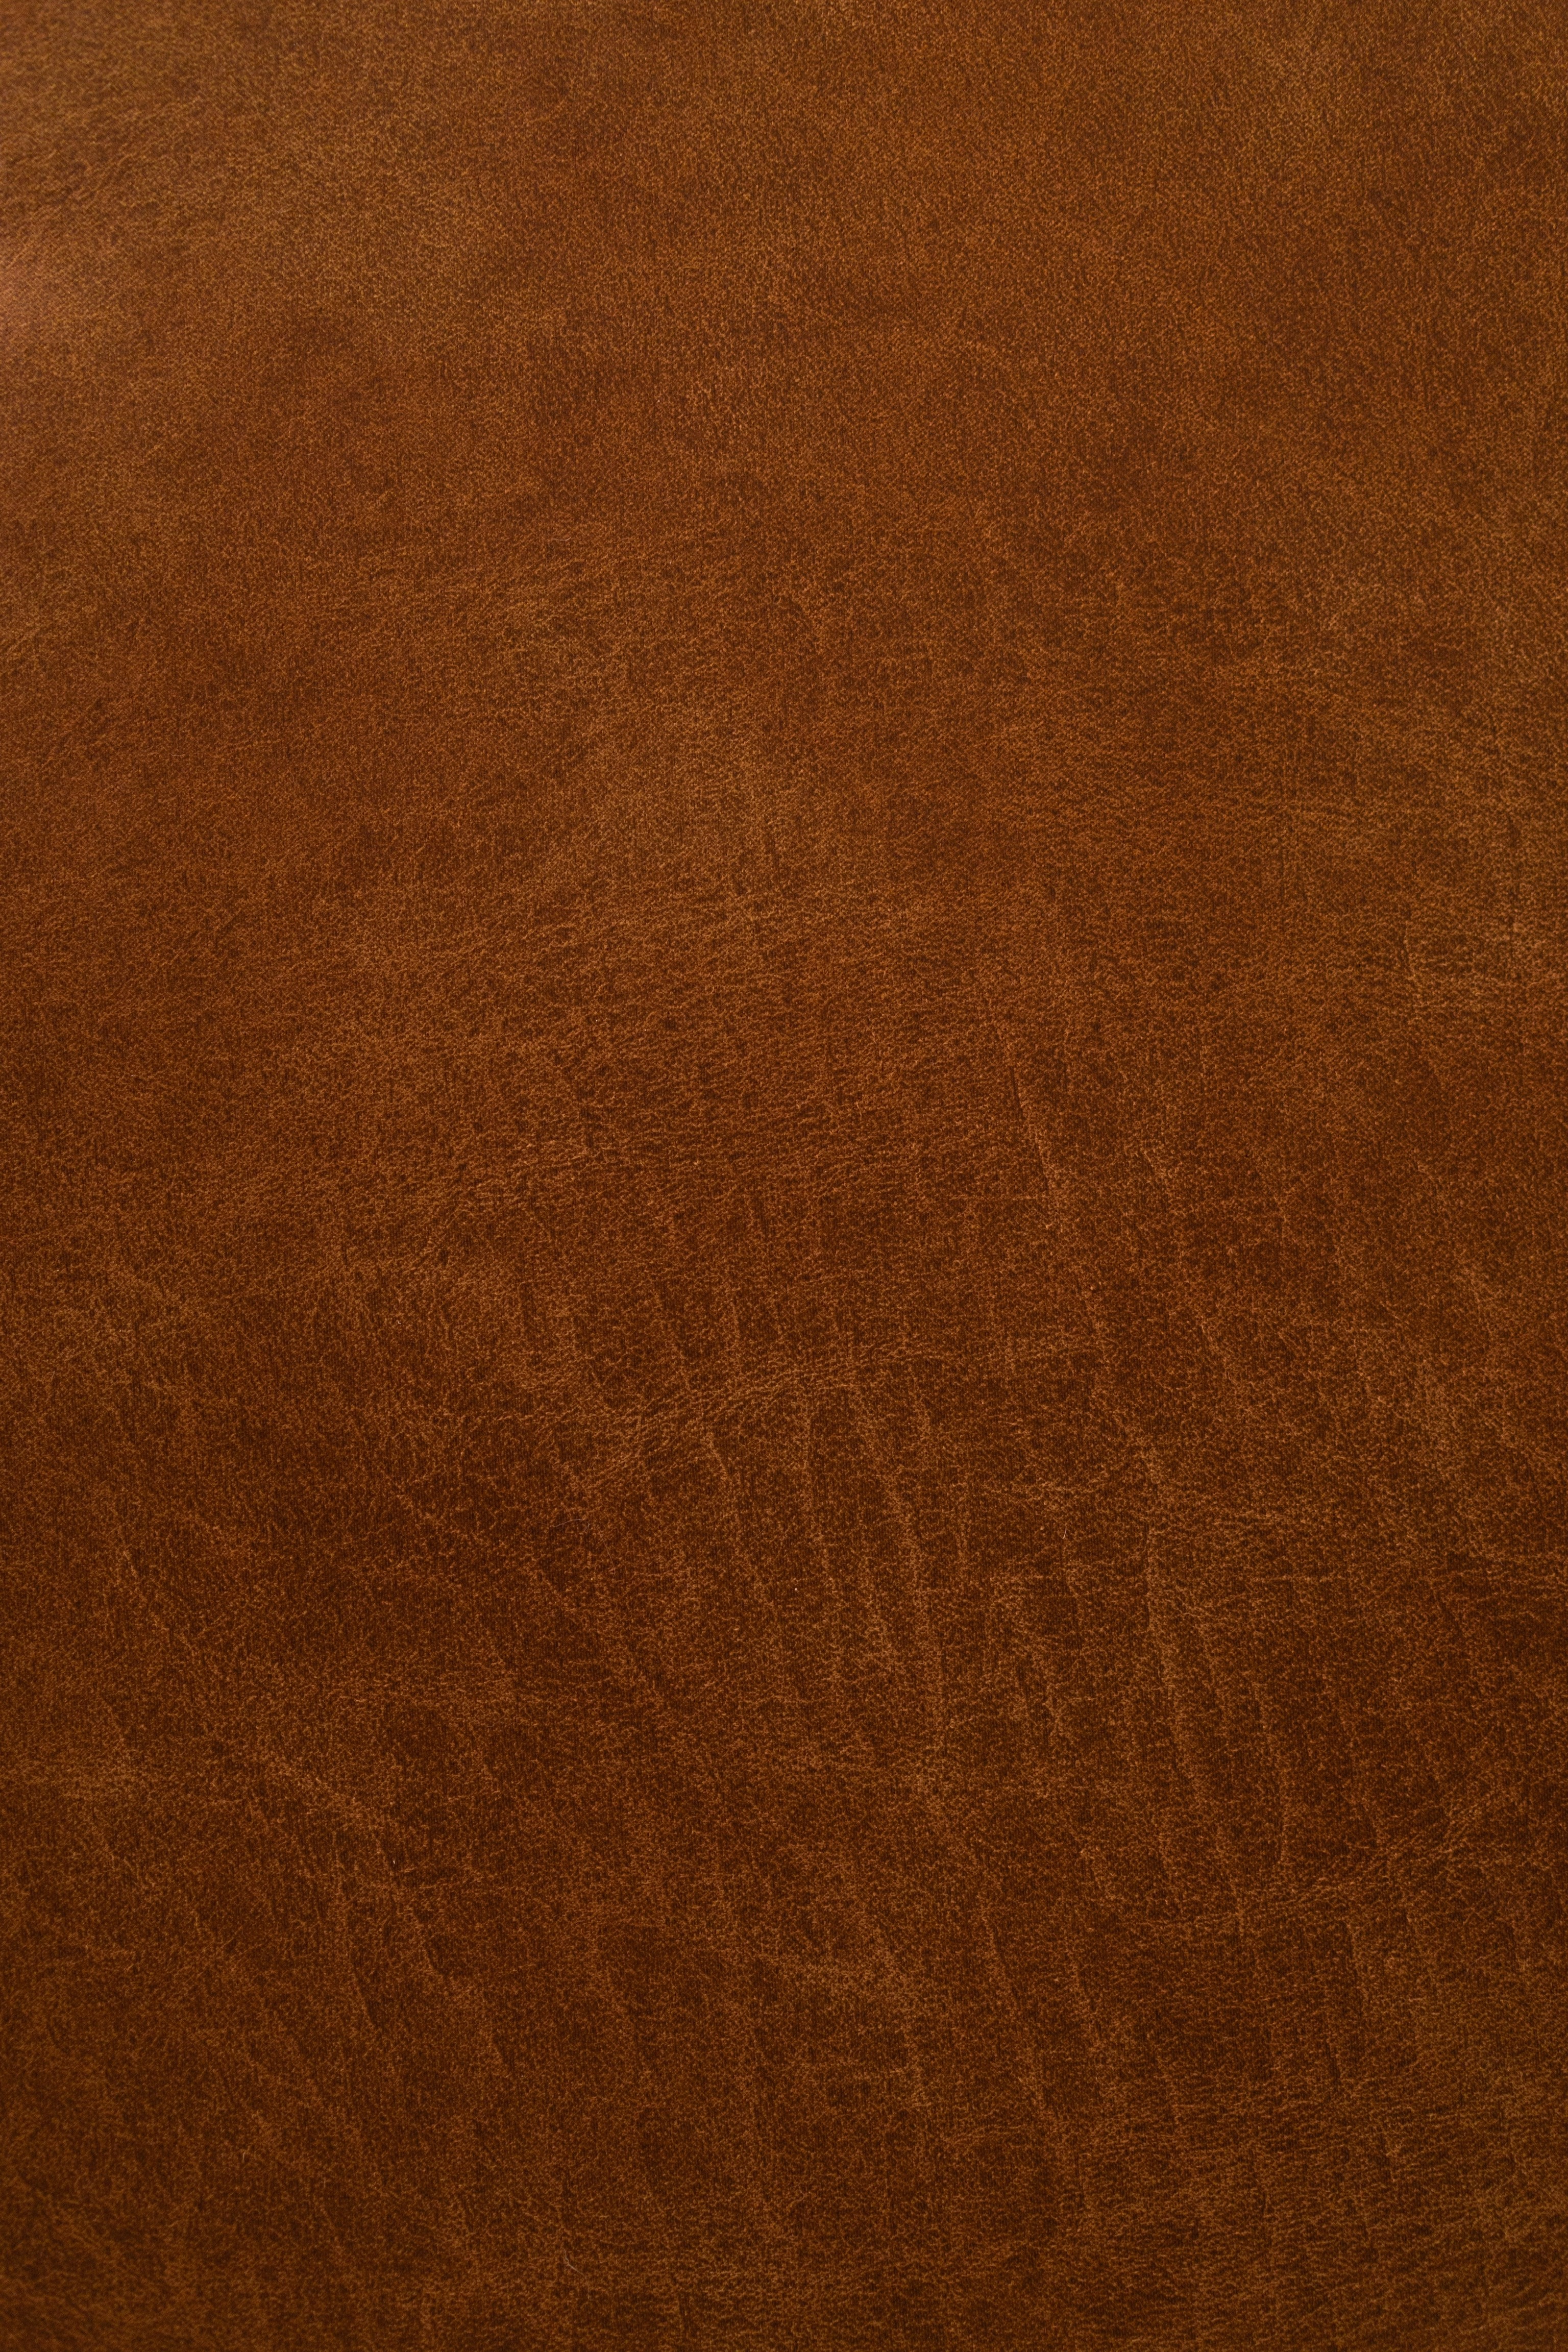 surface, texture, textures, brown, leather, skin Full HD